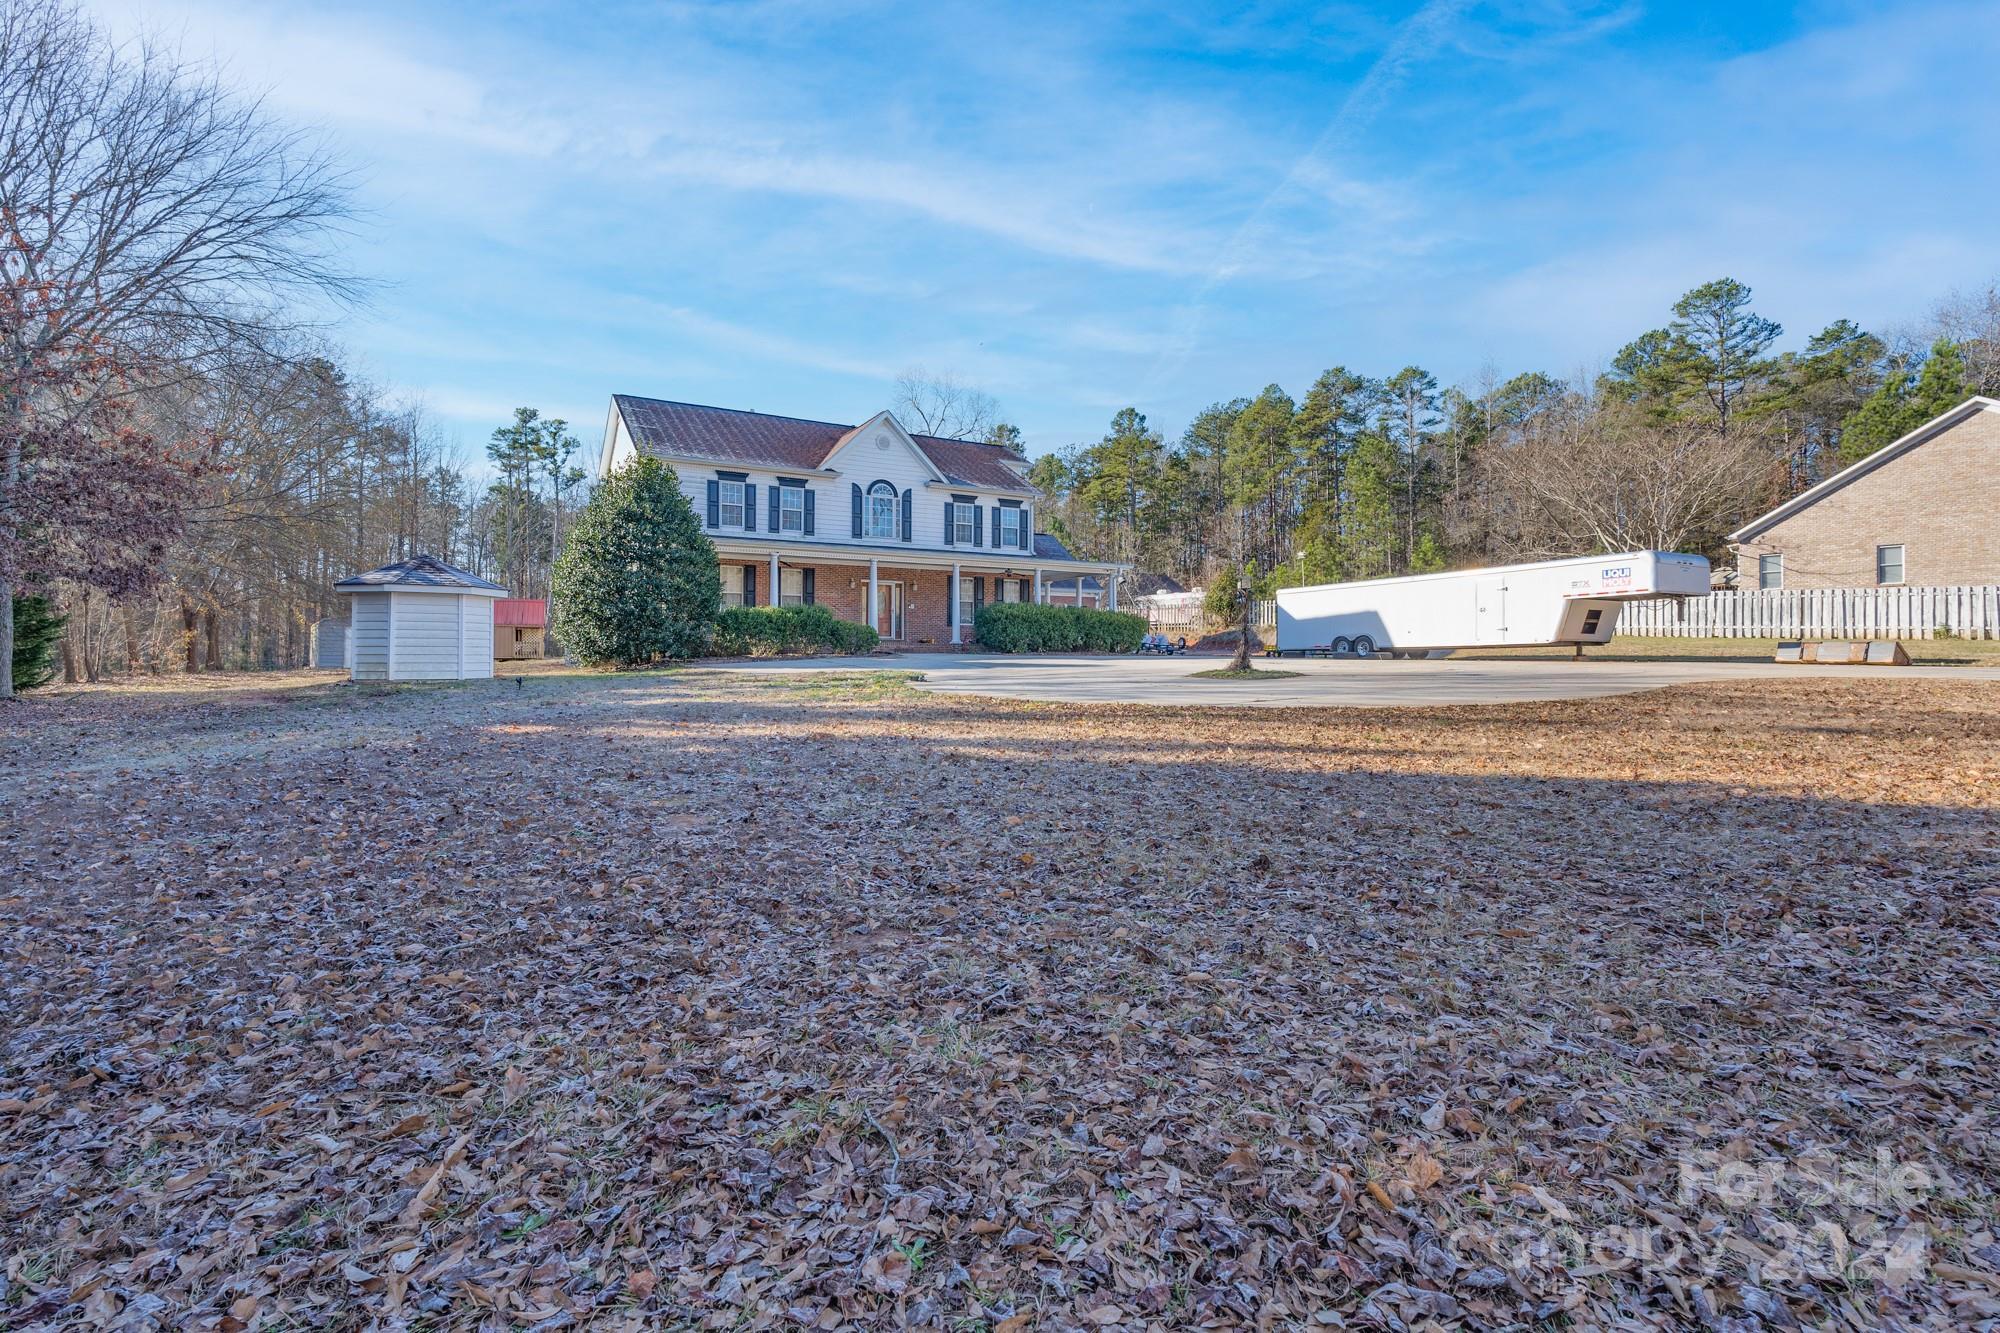 Photo one of 1491 Hwy 160 E Rd Fort Mill SC 29715 | MLS 4096352